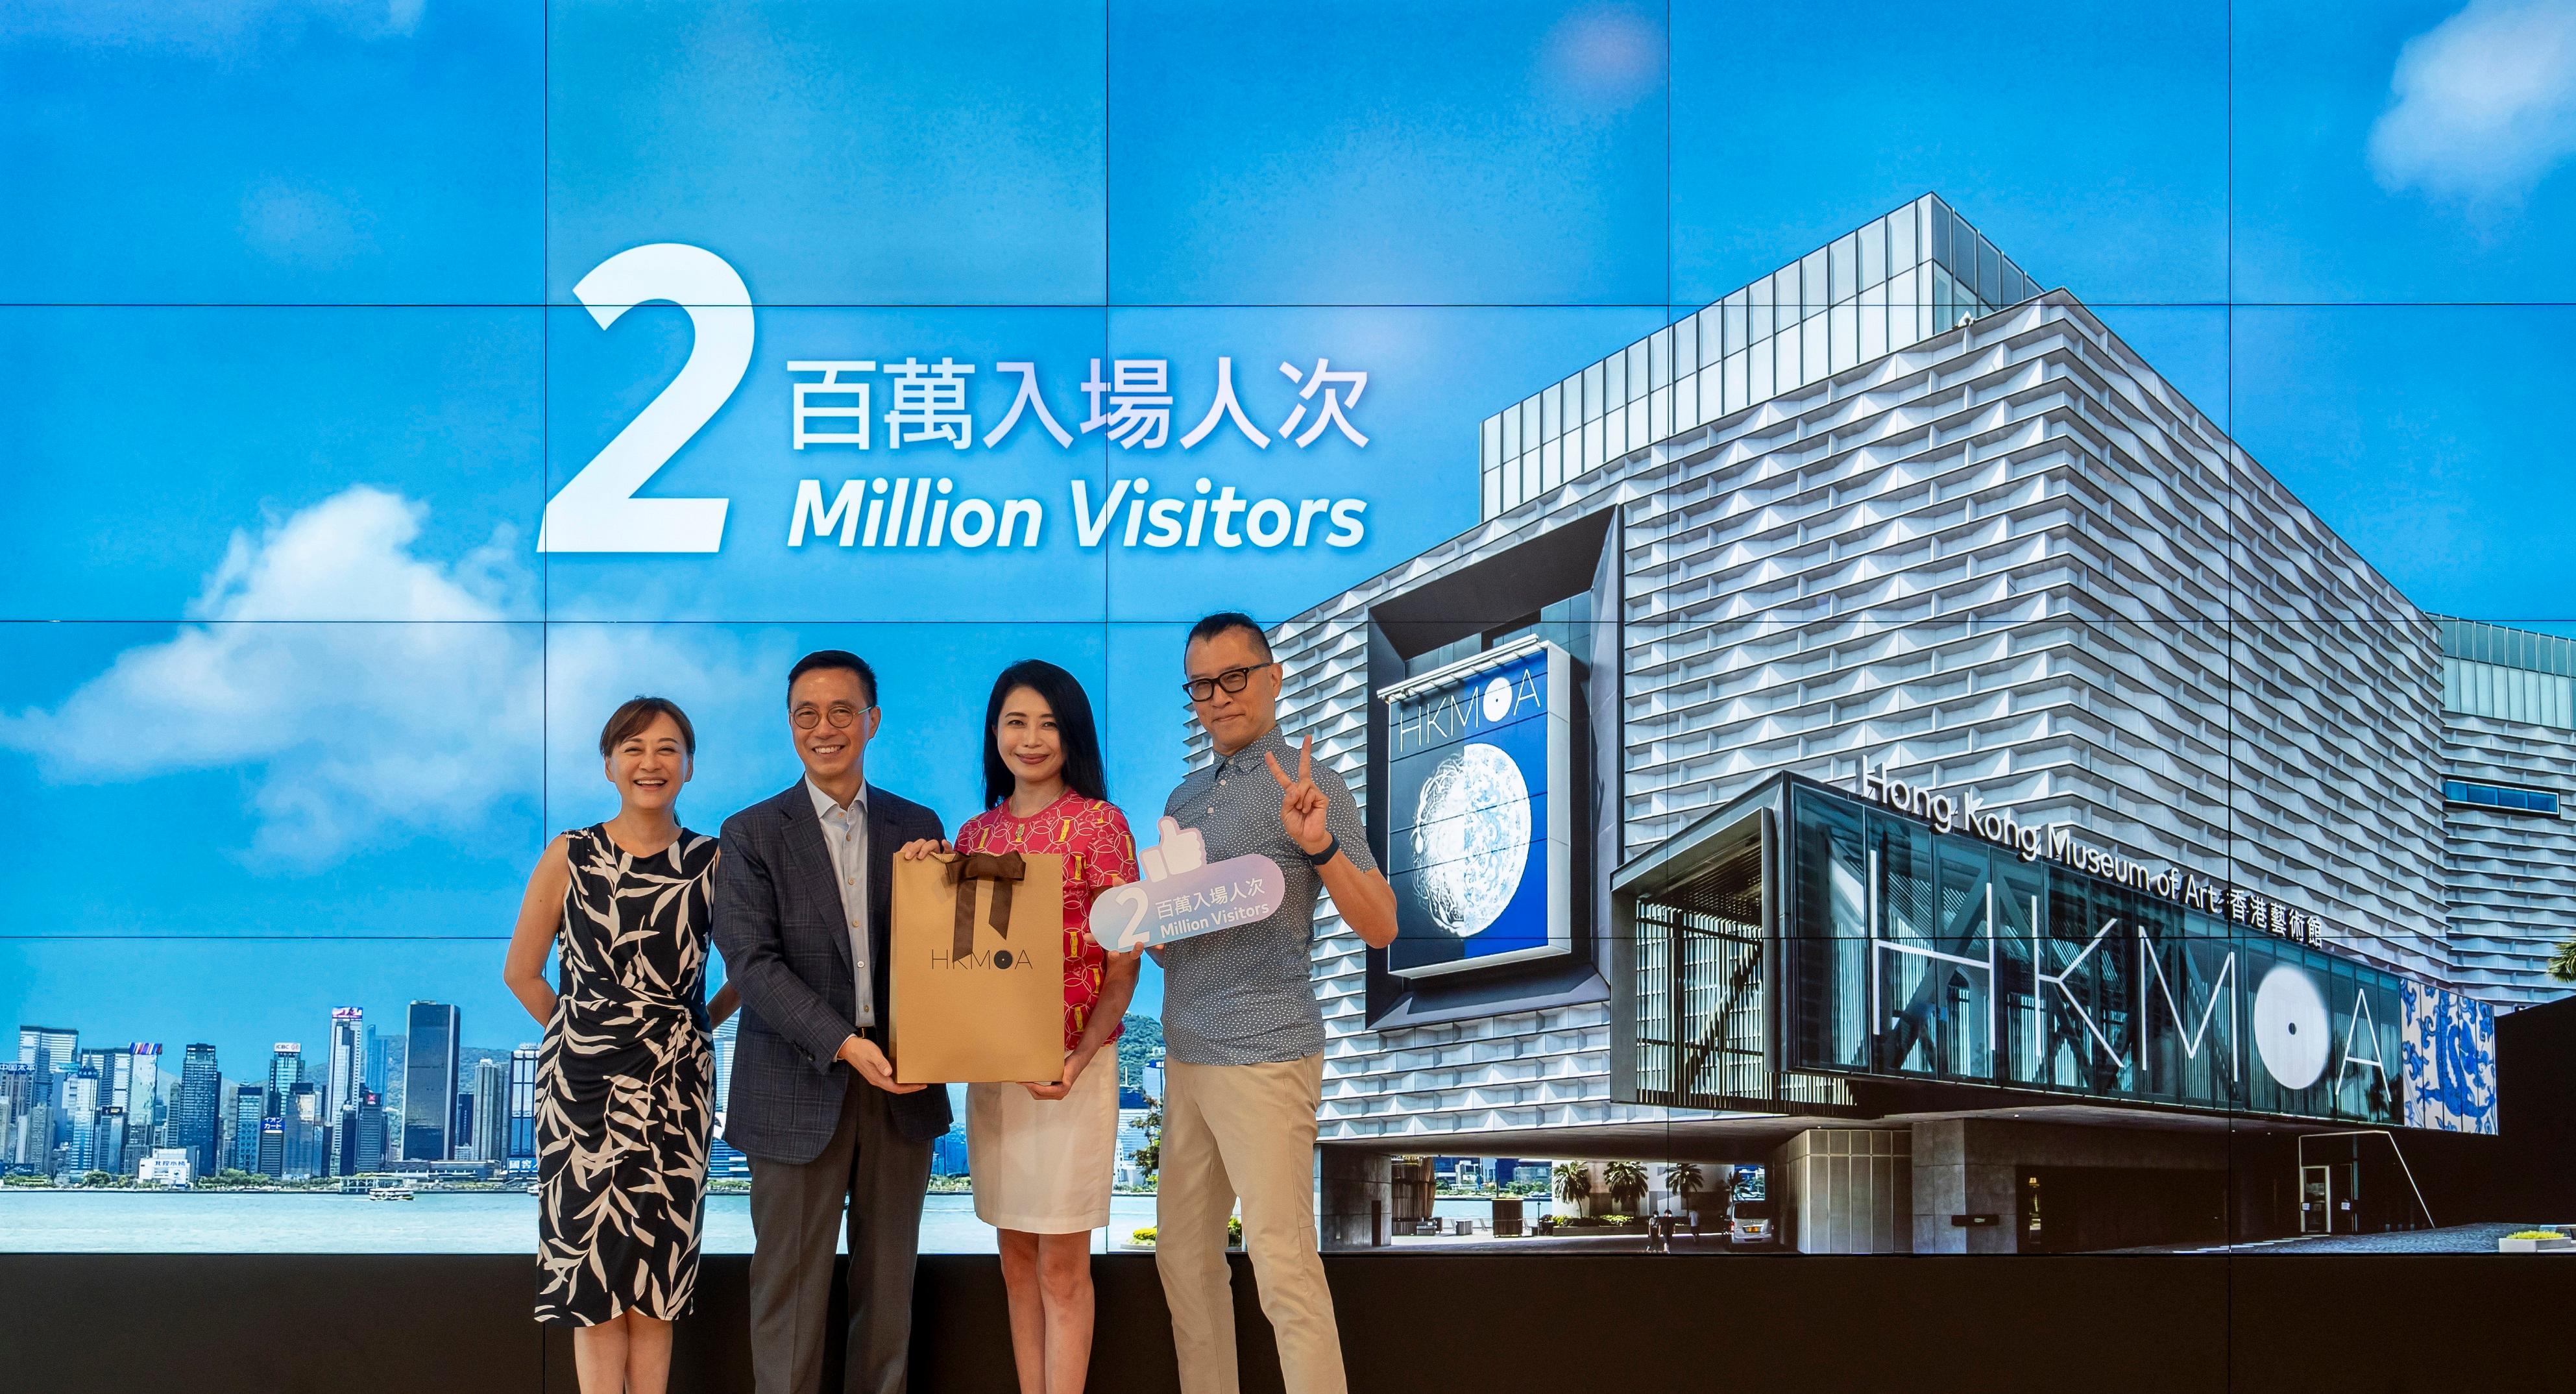 The Hong Kong Museum of Art (HKMoA) of the Leisure and Cultural Services Department has been popular among the local public and tourists. The number of visitors has reached a new high since its reopening after a major renovation in 2019 and the HKMoA welcomed its 2,000,000th visitor today (August 12). Picture shows the Secretary for Culture, Sports and Tourism, Mr Kevin Yeung (second left), and the Museum Director of the HKMoA, Dr Maria Mok (first left), welcoming the 2,000,000th visitor and presenting to the visitor some special souvenirs.